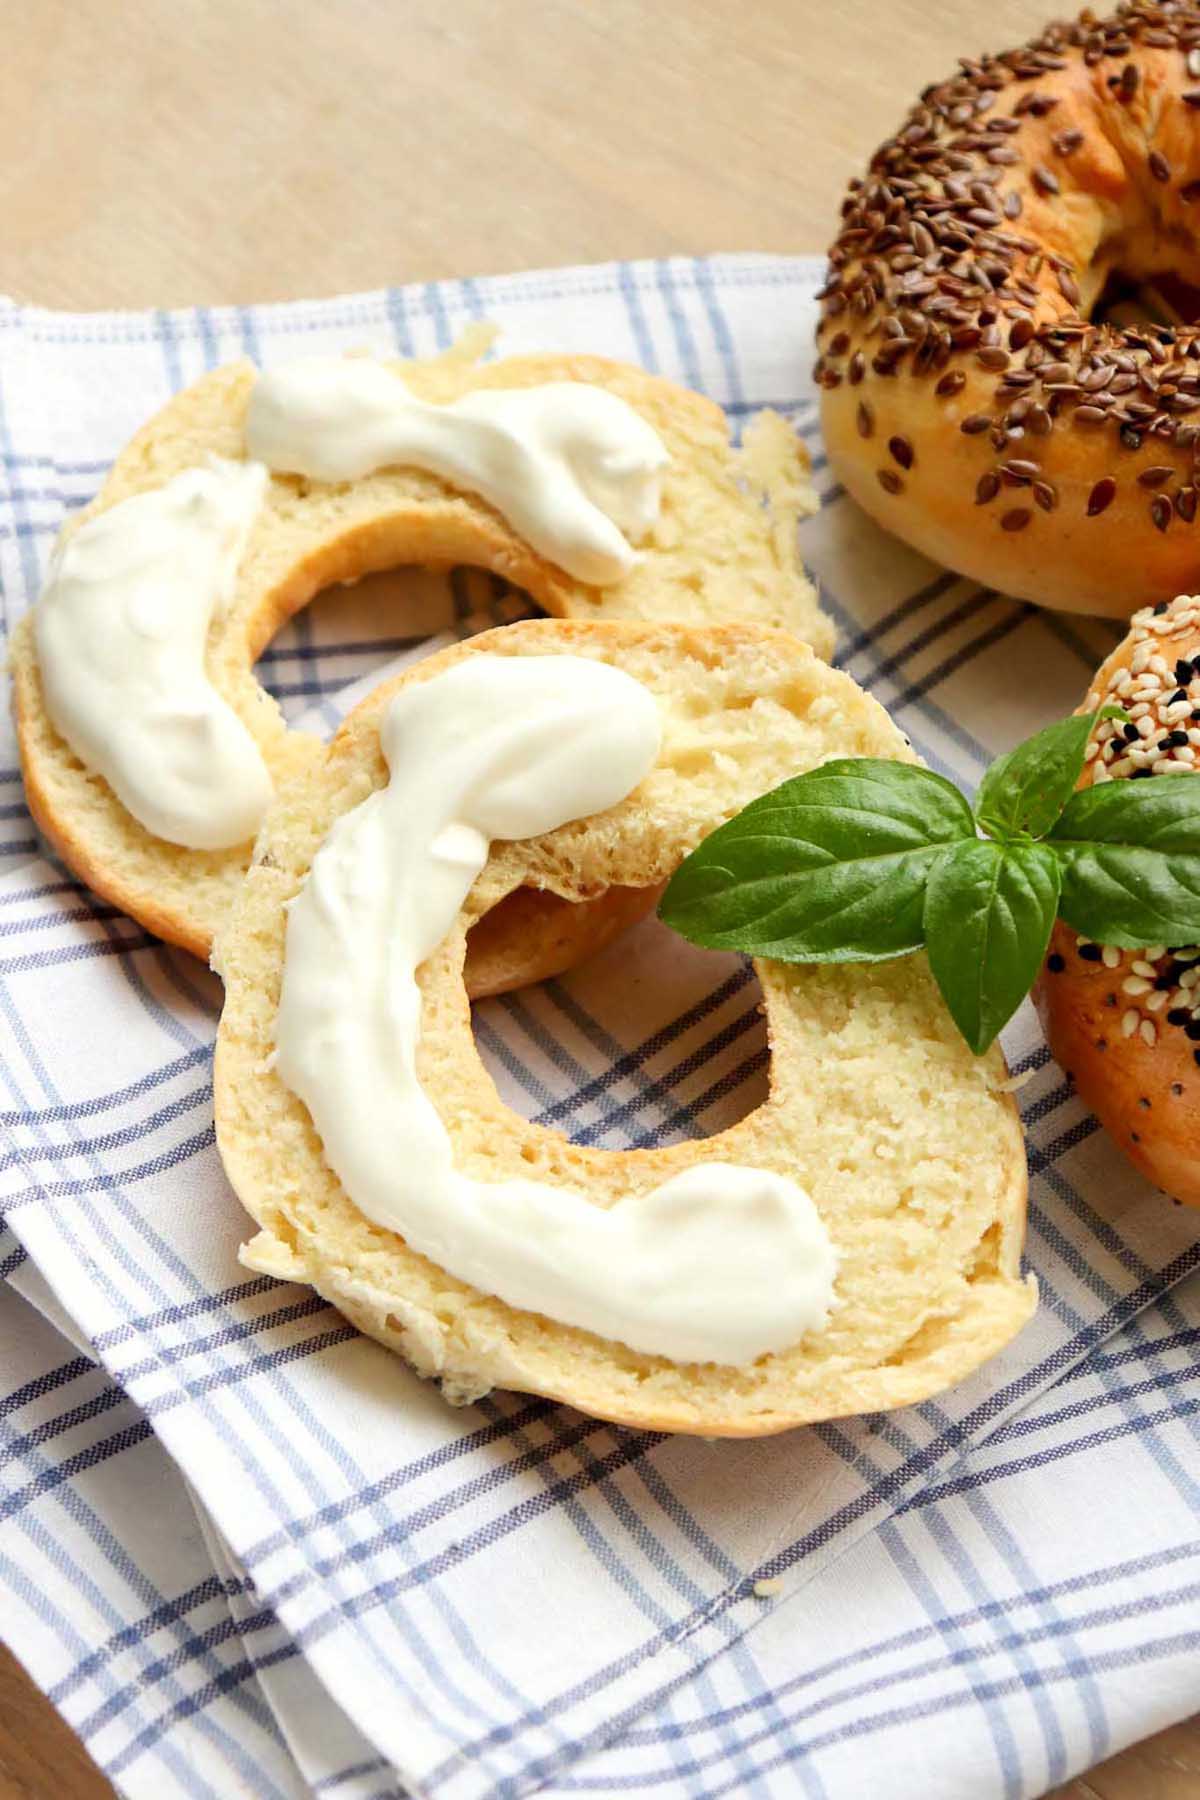 A bagel cut in half with cream cheese.